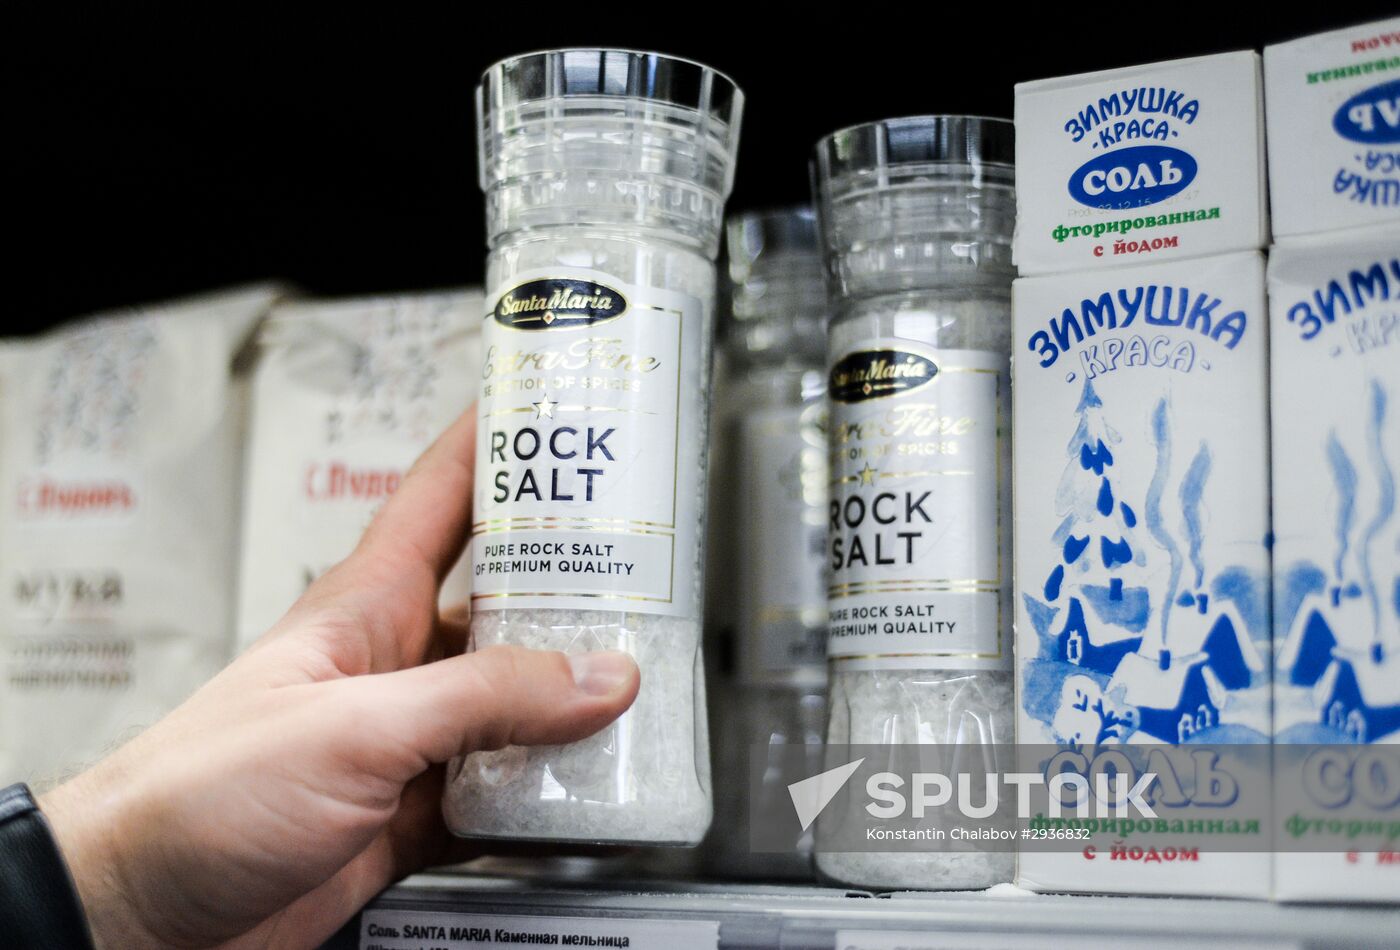 Russia extended food import ban on salt